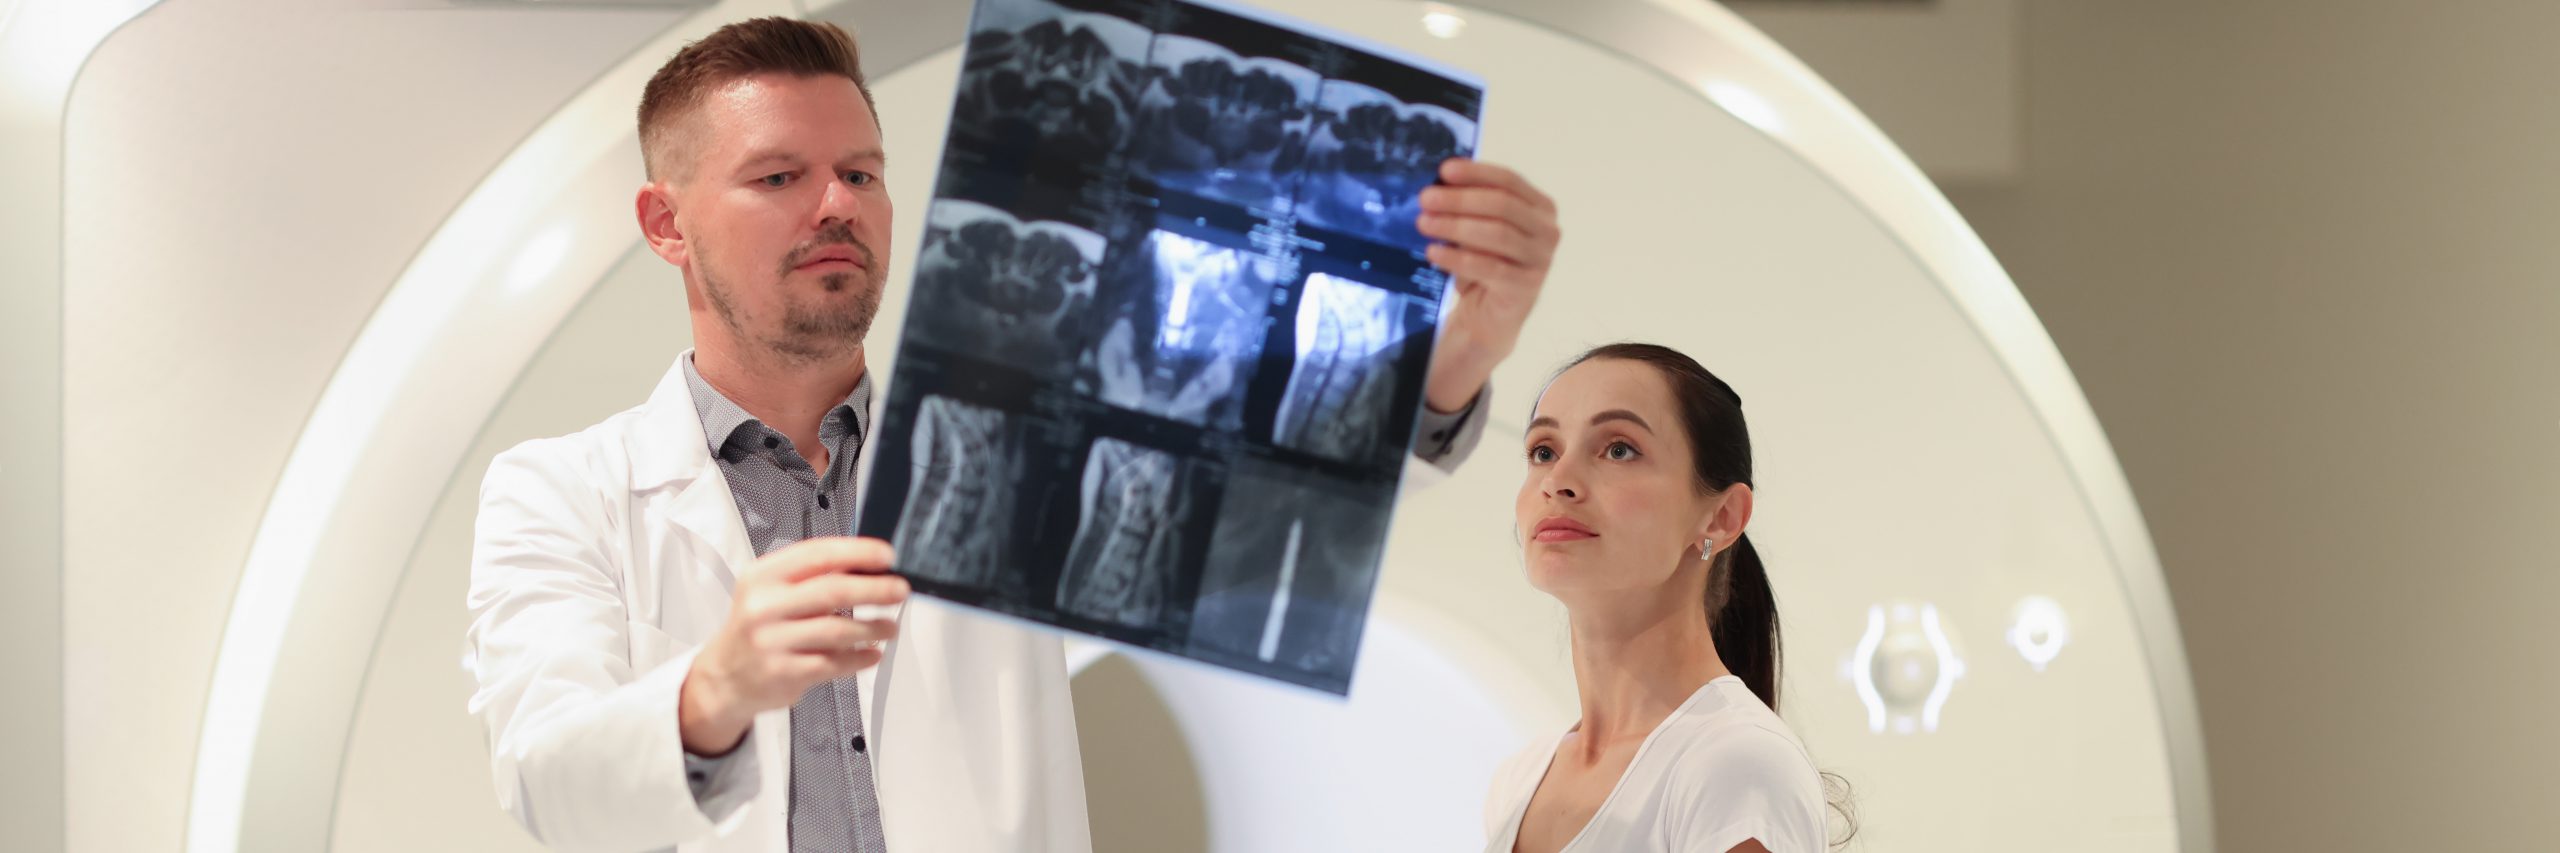 Doctor radiologist looking at snapshot of patient spine in front of mri machine